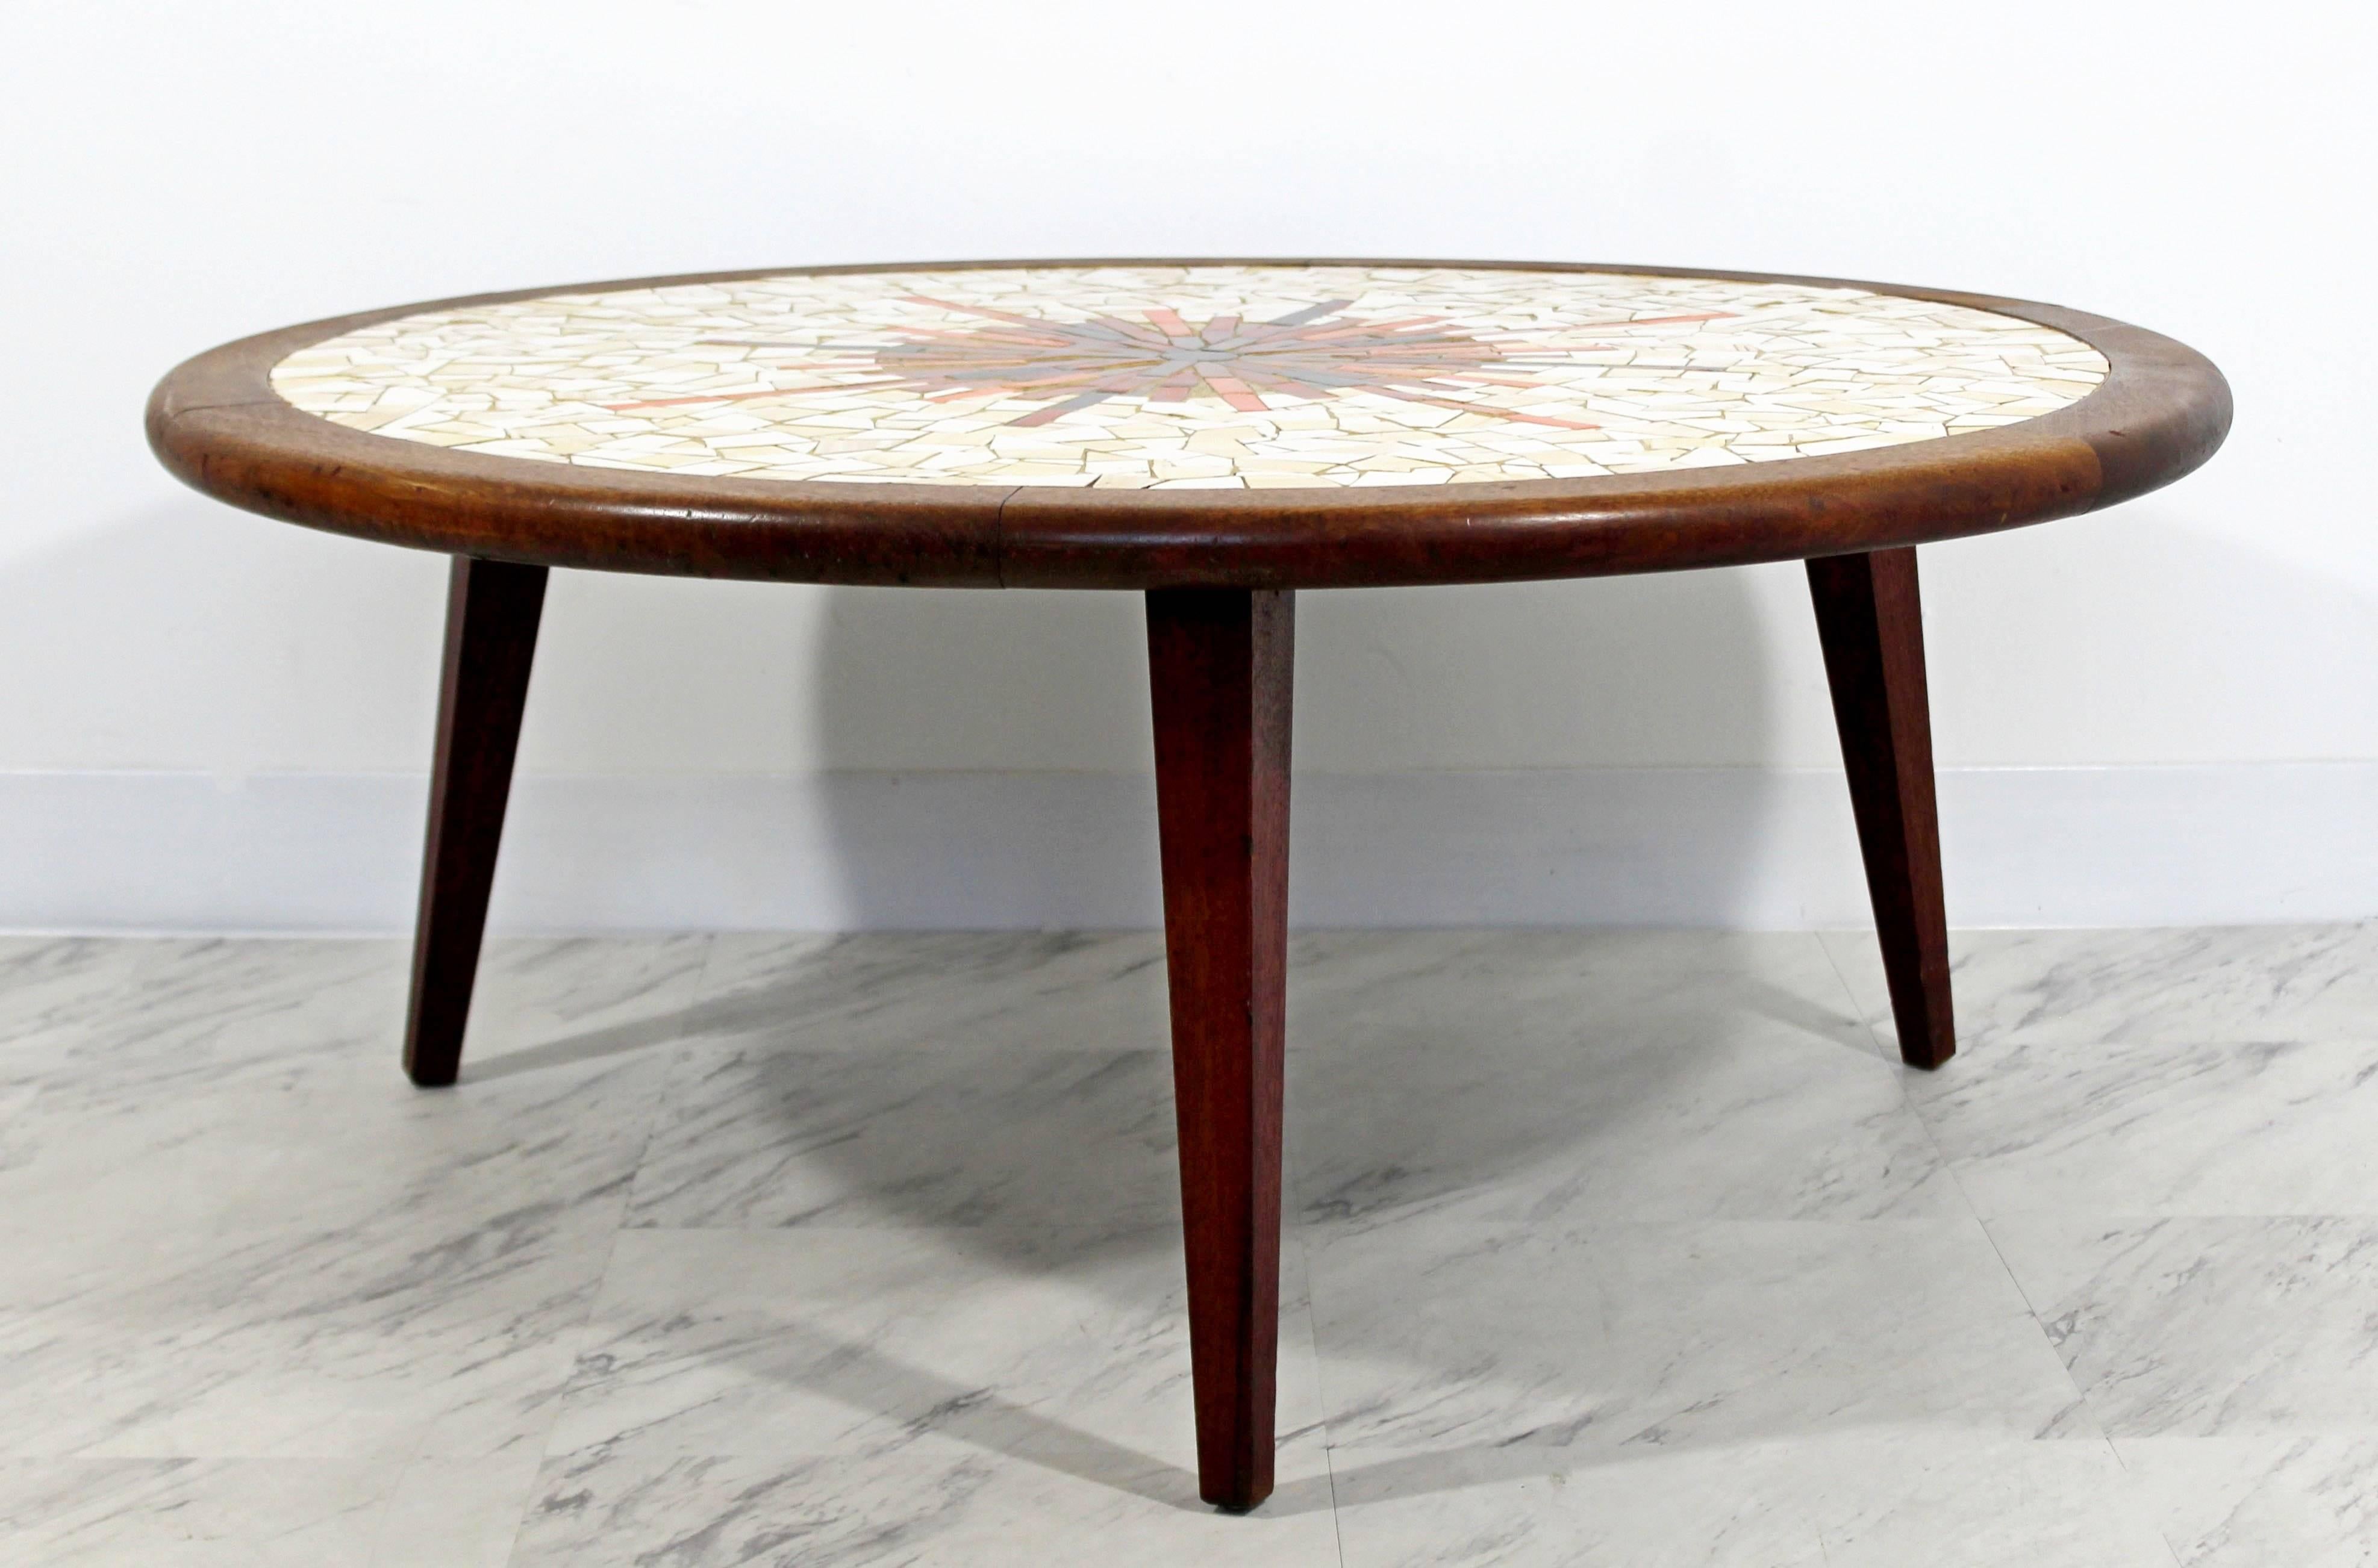 For your consideration is a sunburst or starburst, tile mosaic top, wooden coffee table, stamped Hohenberg Original on bottom. In excellent condition. The dimensions are 36